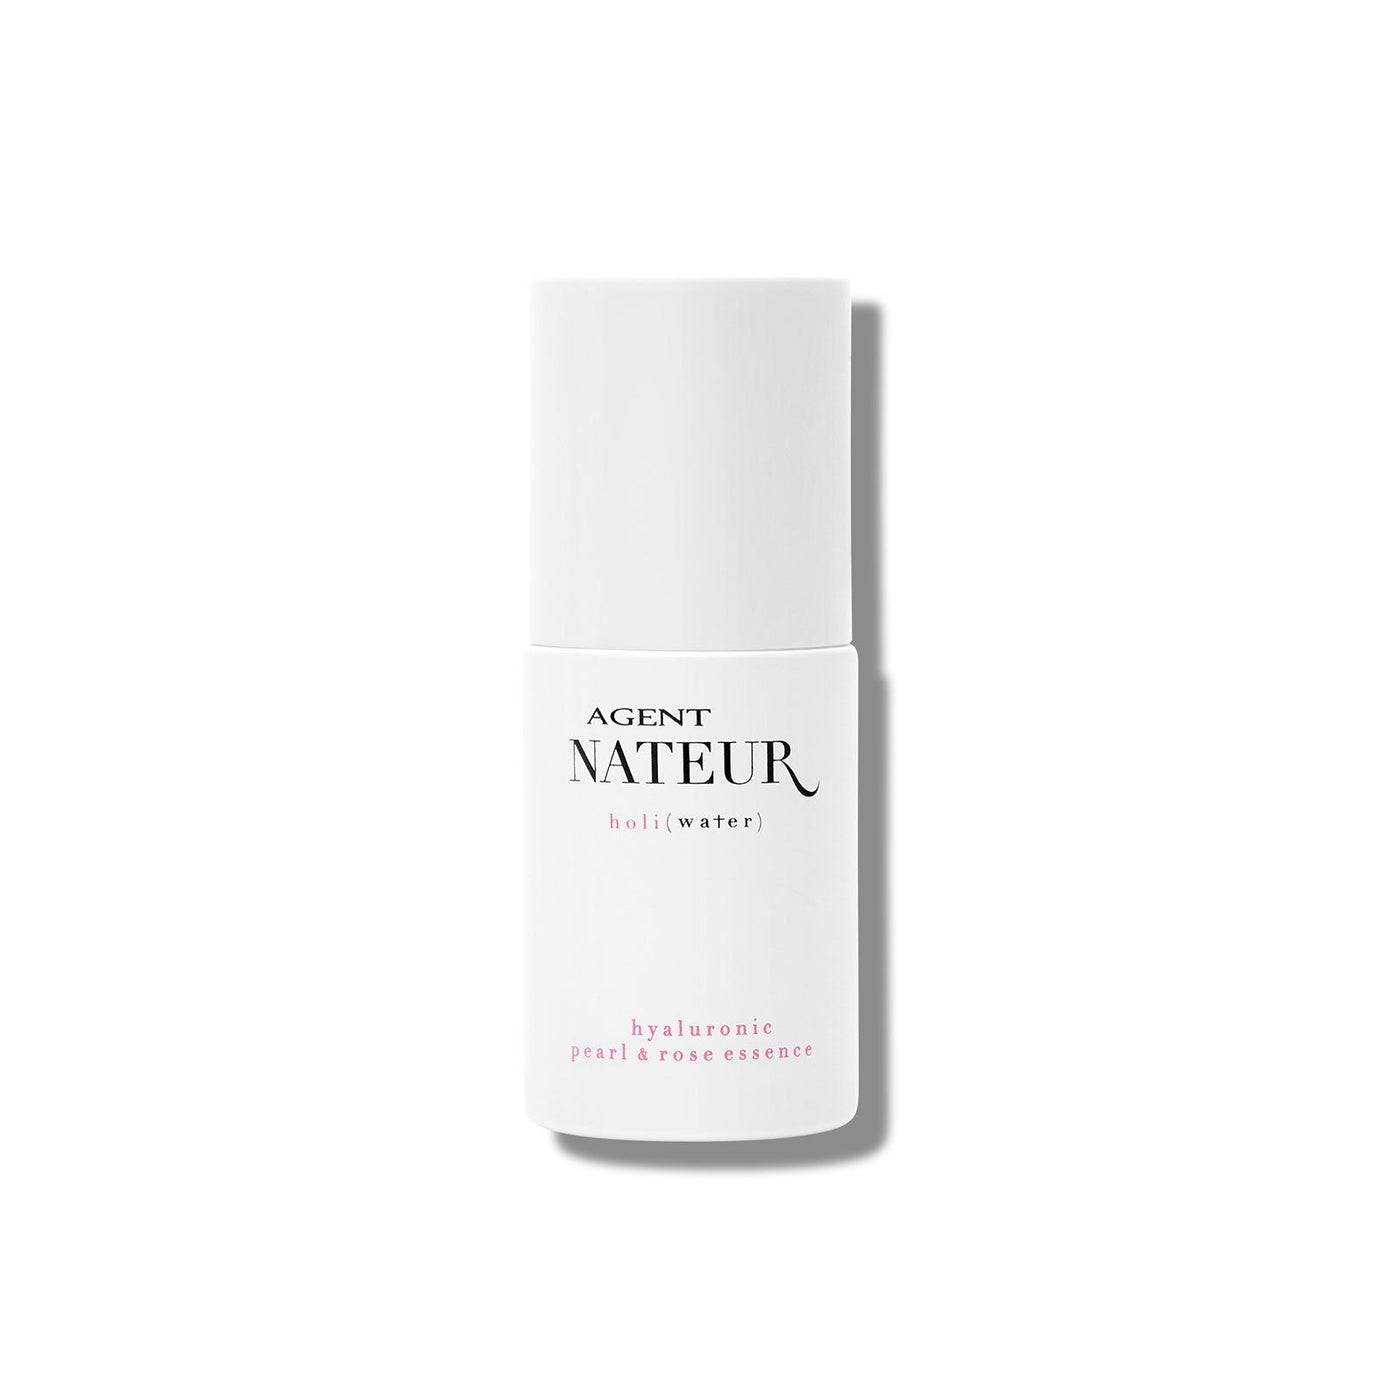 Agent Nateur Holi (Water) Pearl and Rose Hyaluronic Essence, 30ml